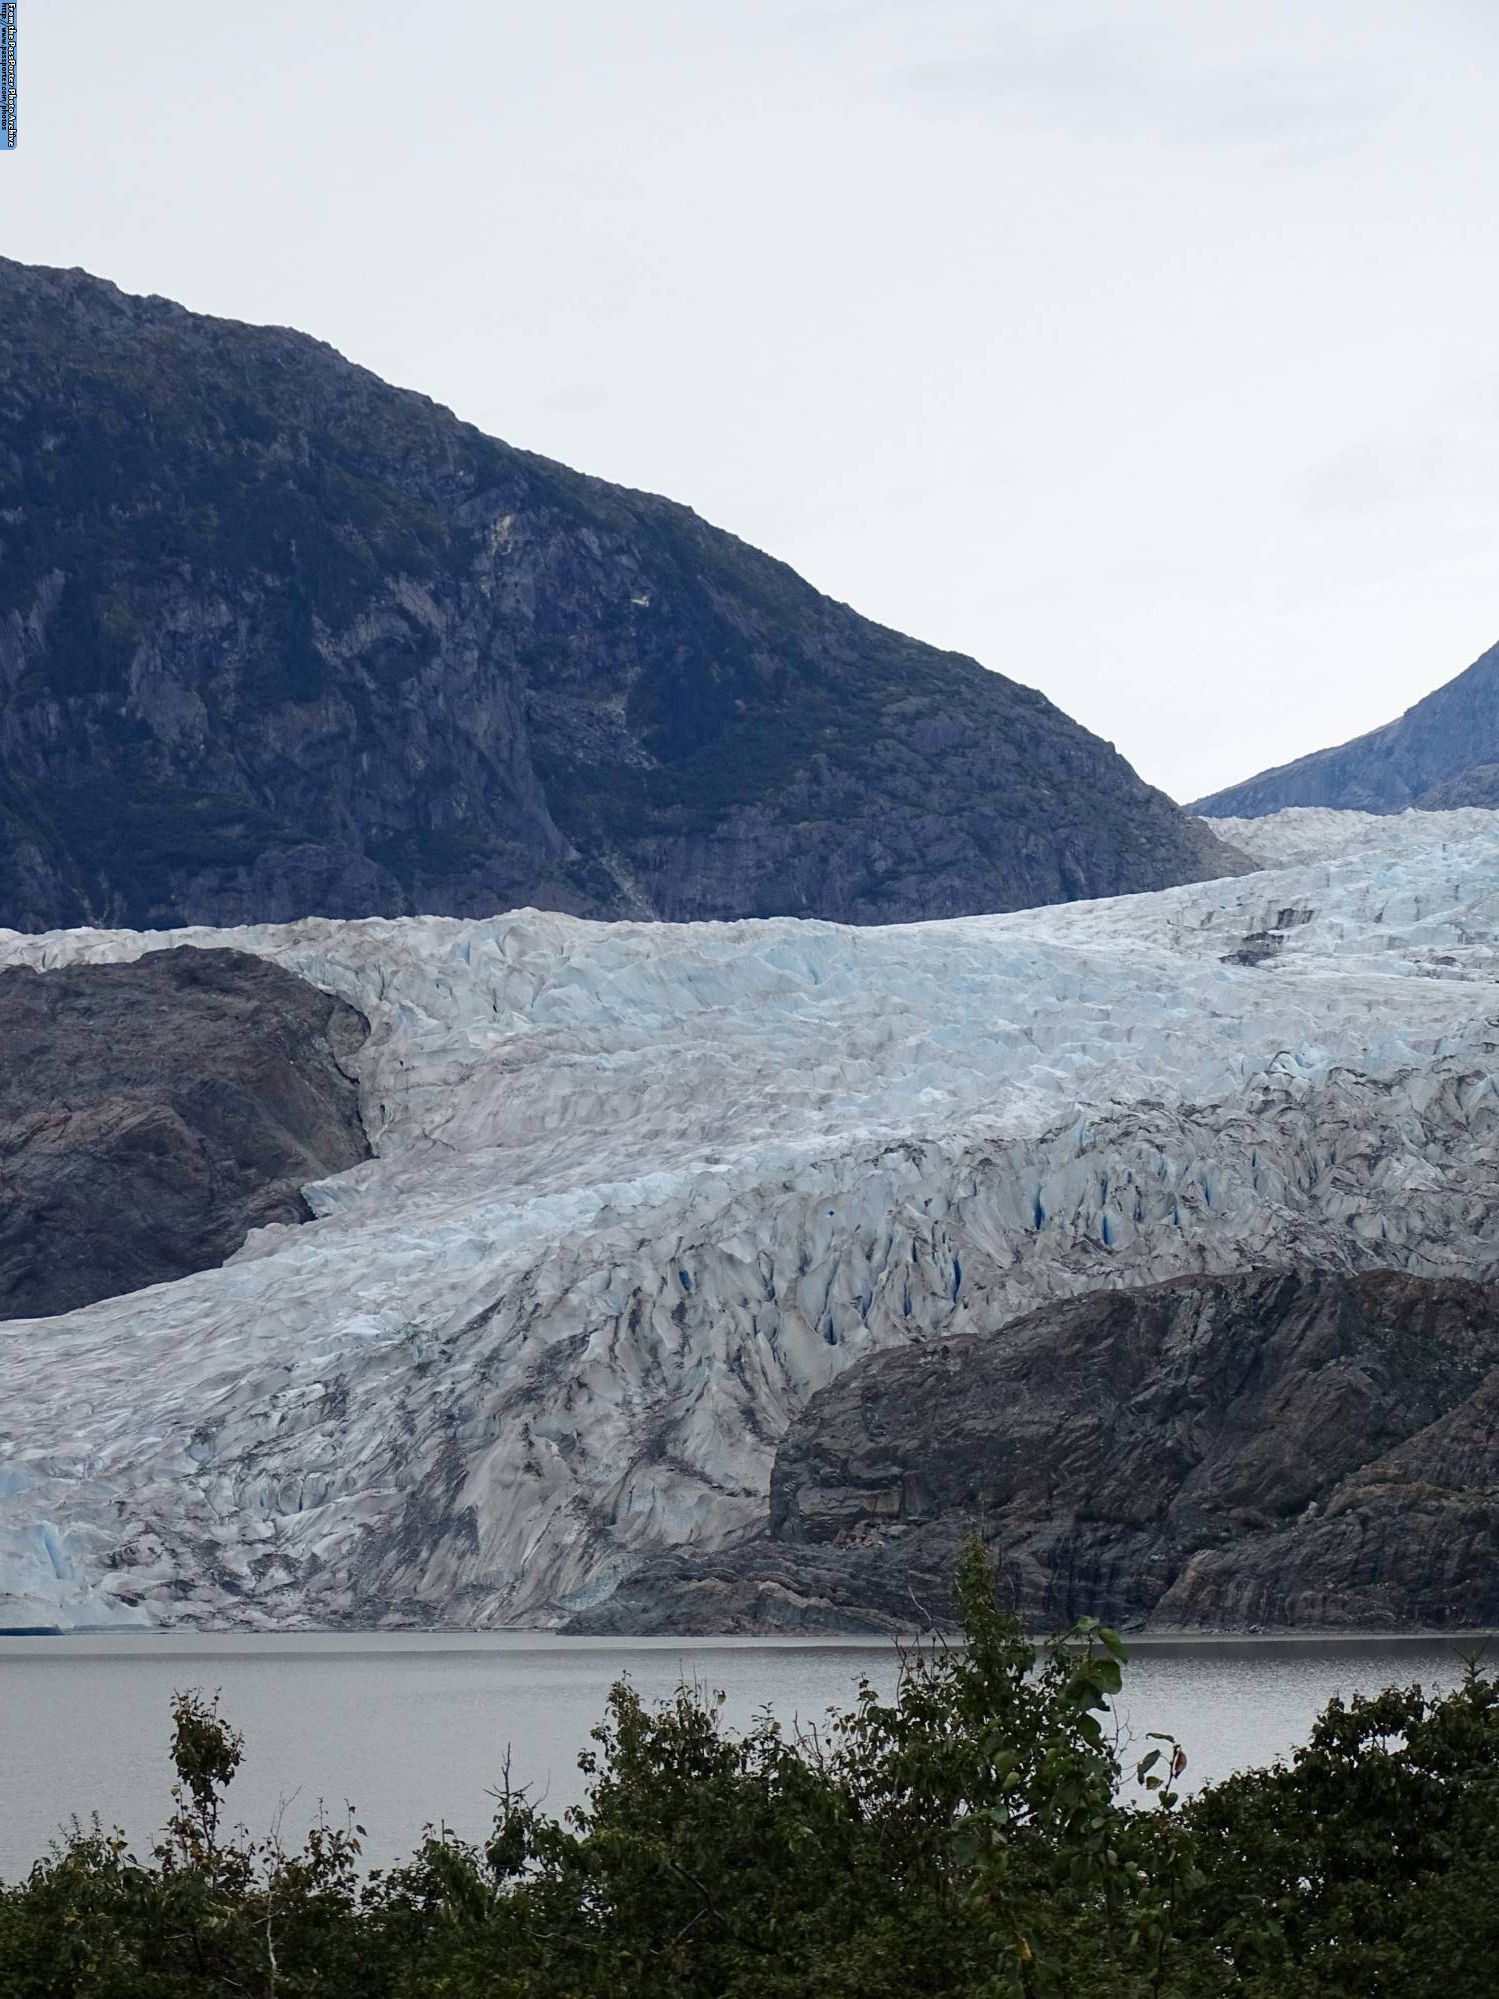 Enjoy the Whales and Glaciers Photo Safari in Juneau while on your Disney Cruise to Alaska |PassPorter.com